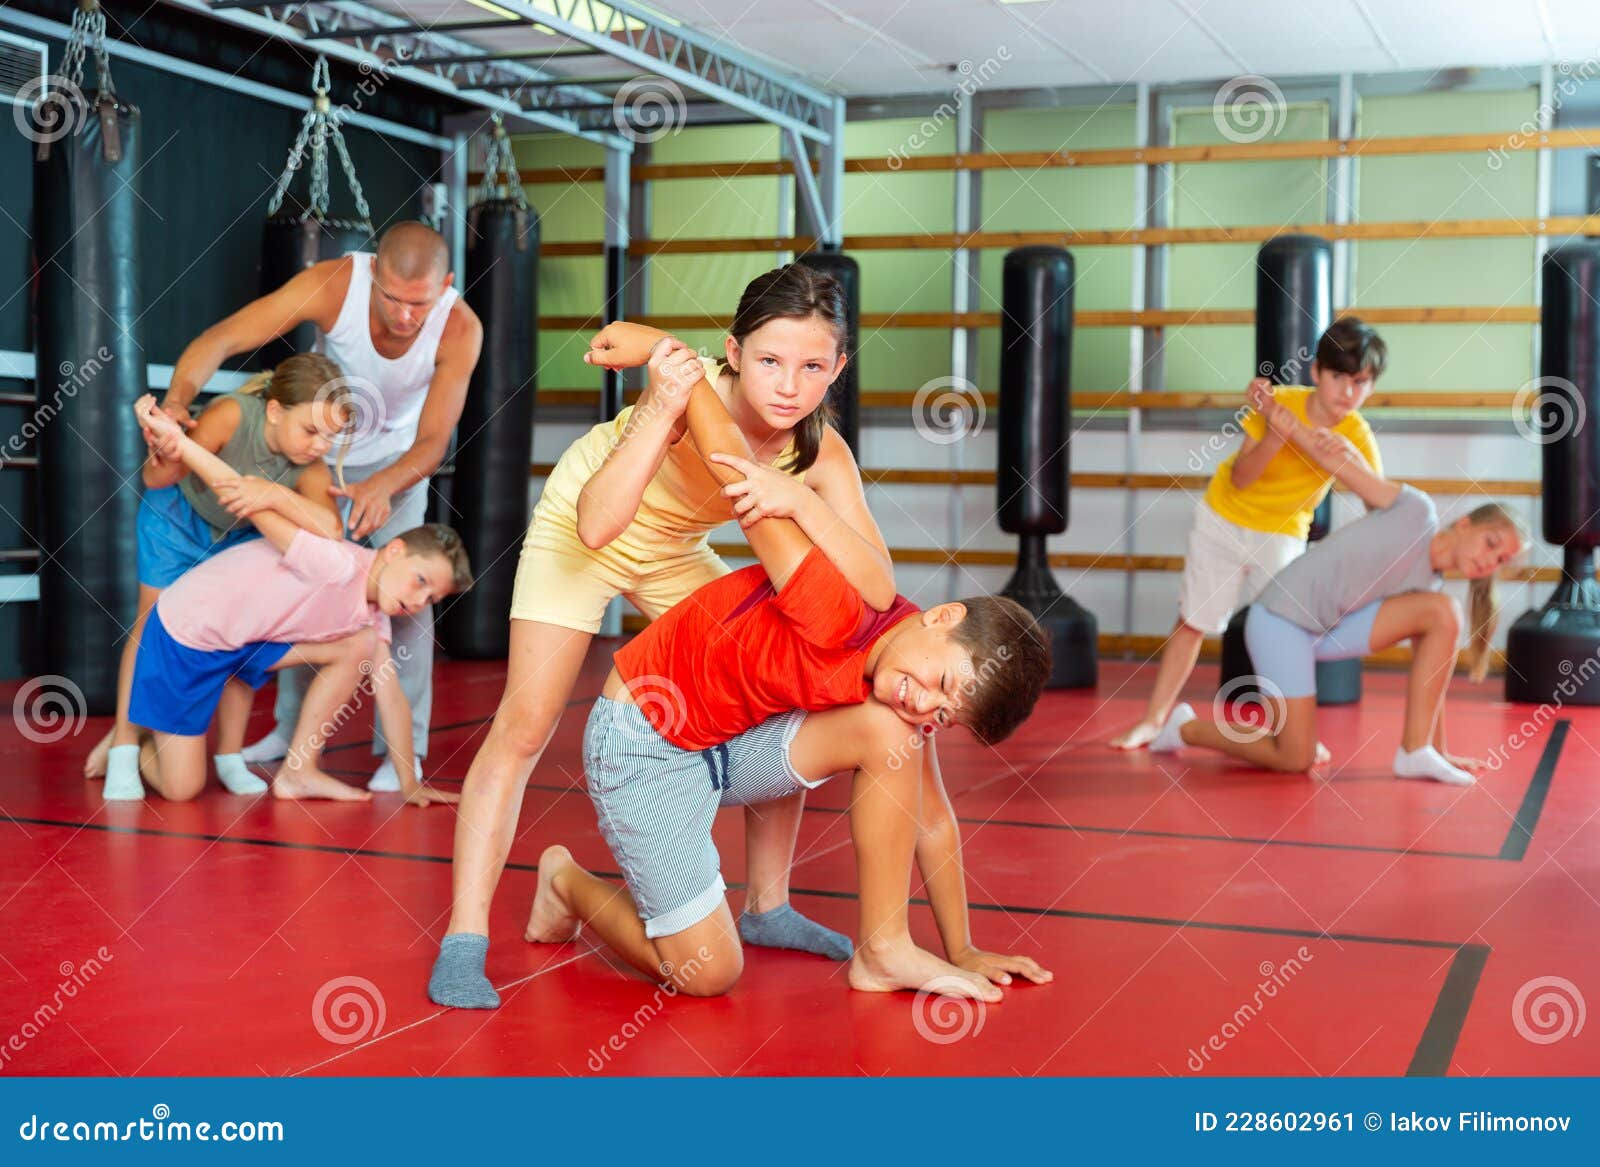 Kids In Pair Exercising Self Defense Movements Stock Image Image Of Exercising Activity